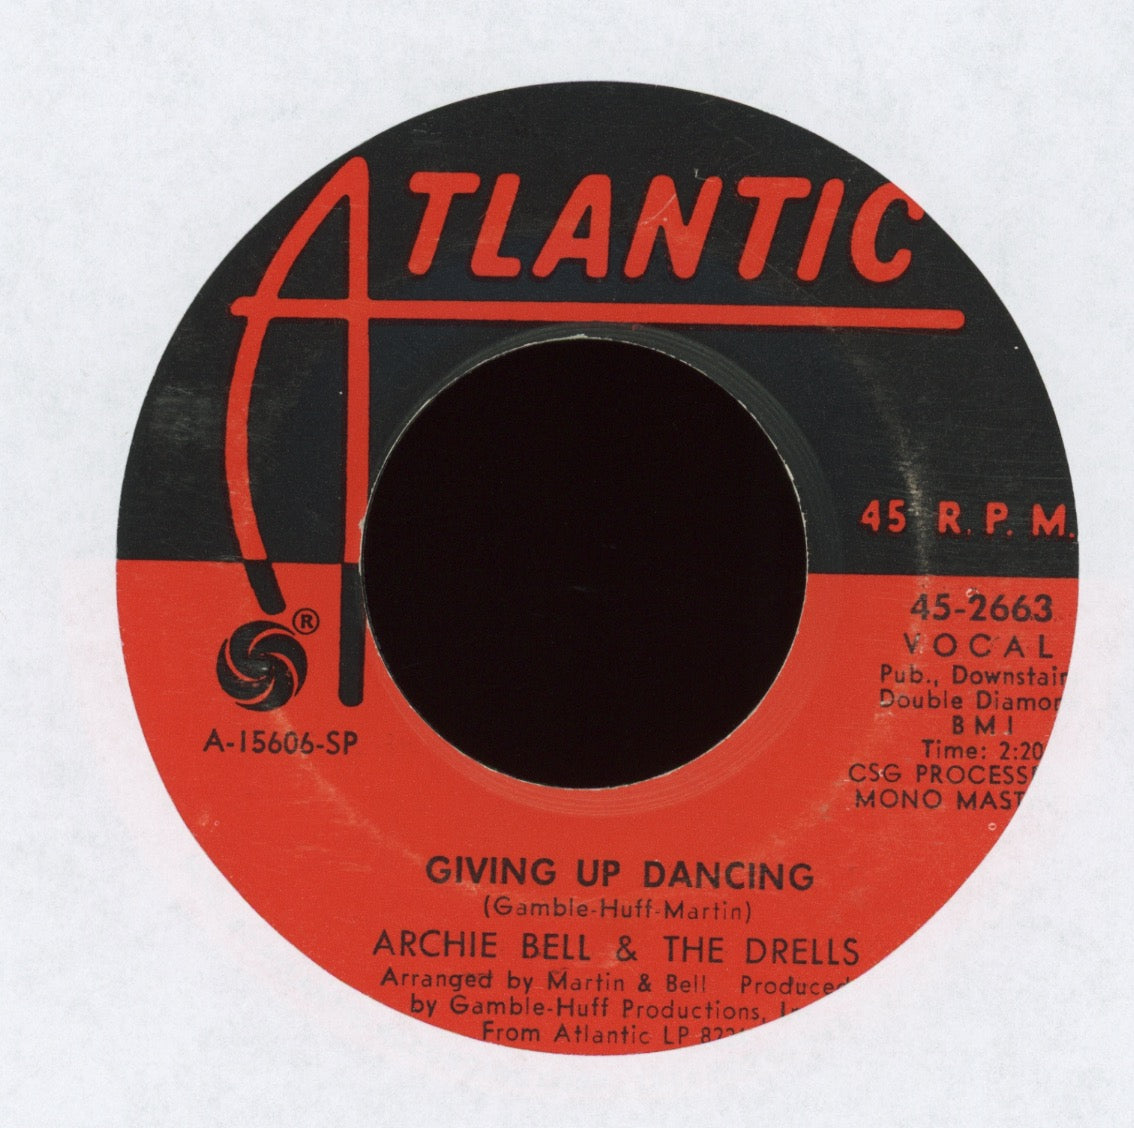 Archie Bell & The Drells - My Balloon's Going Up on Atlantic